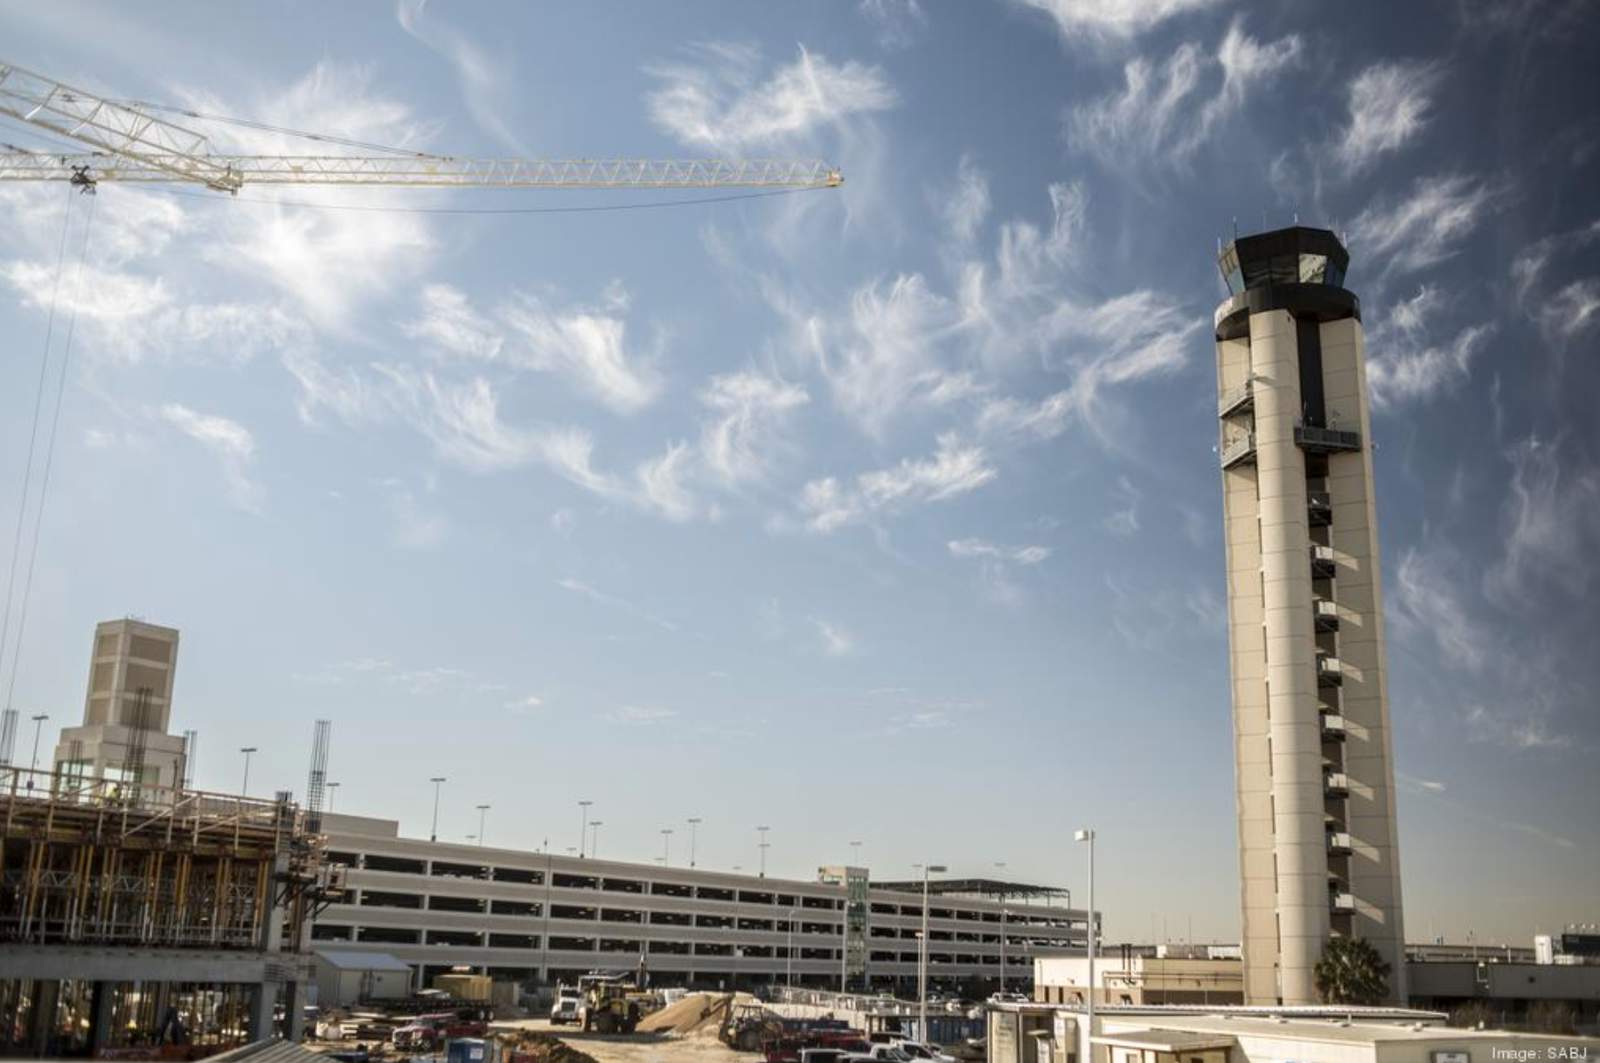 Stimulus plan provides billions for transportation, could help San Antonio airport recover